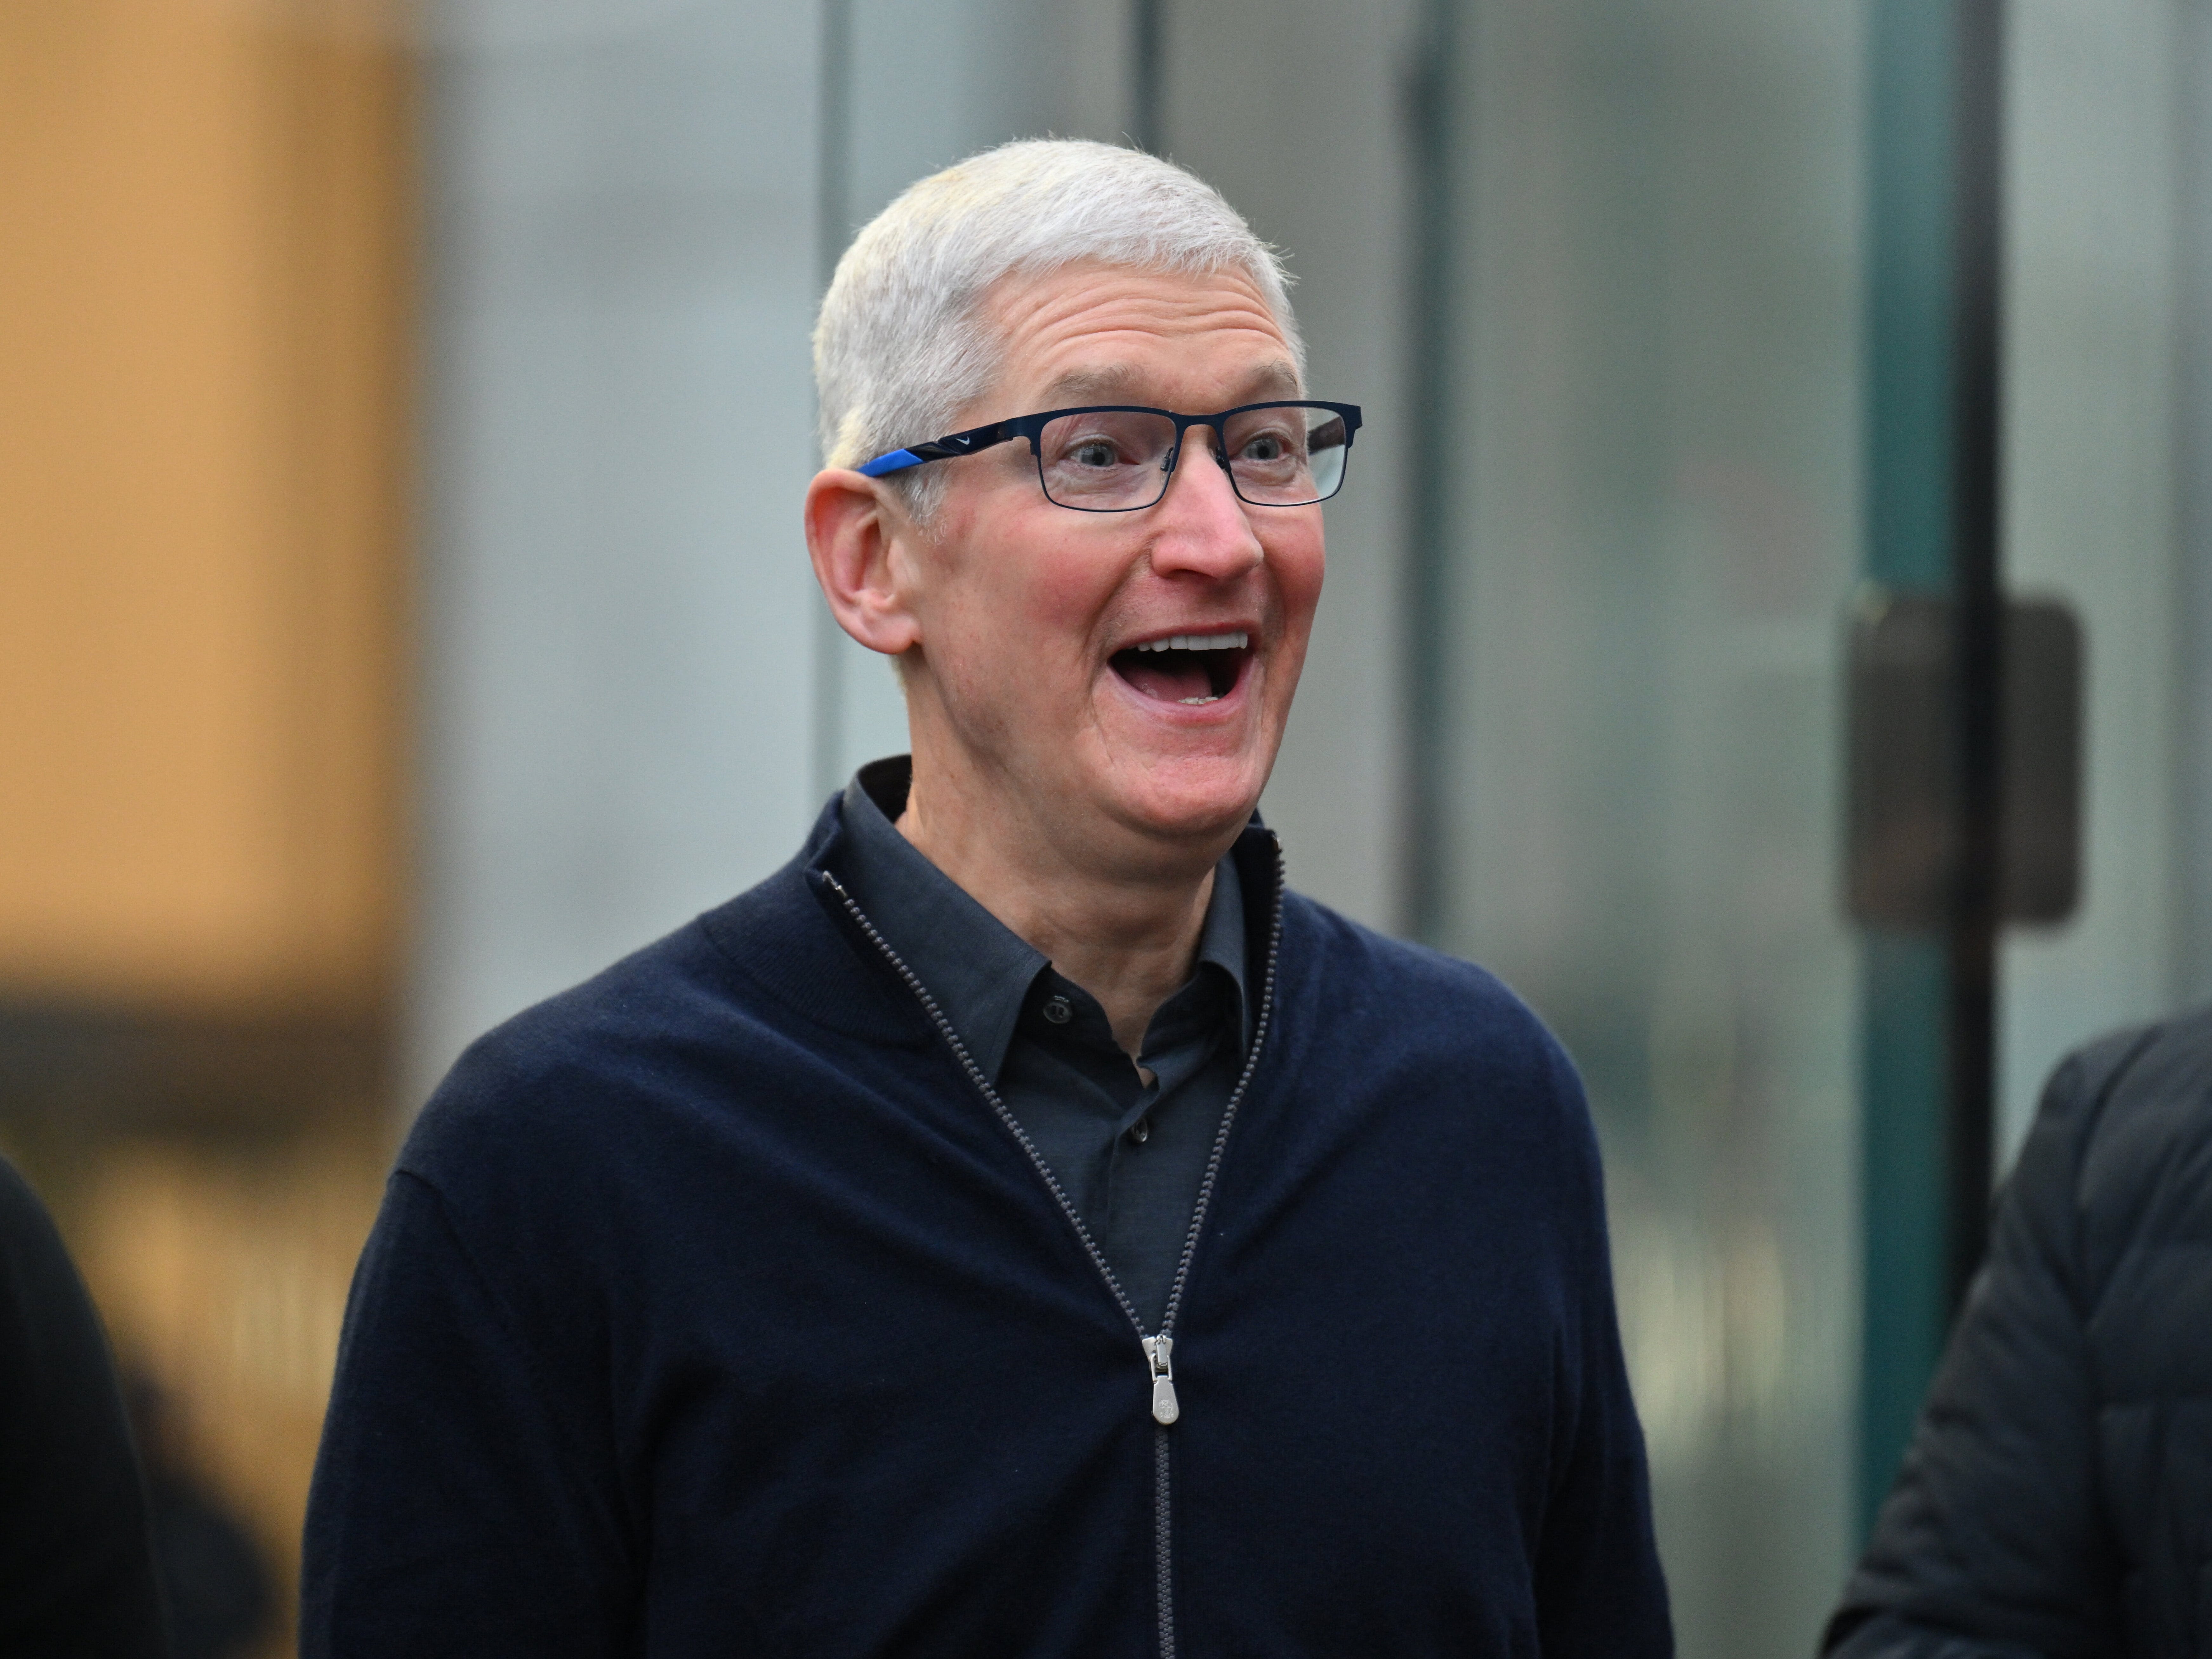 iPhone price cuts might have saved Apple from an even bigger China crisis